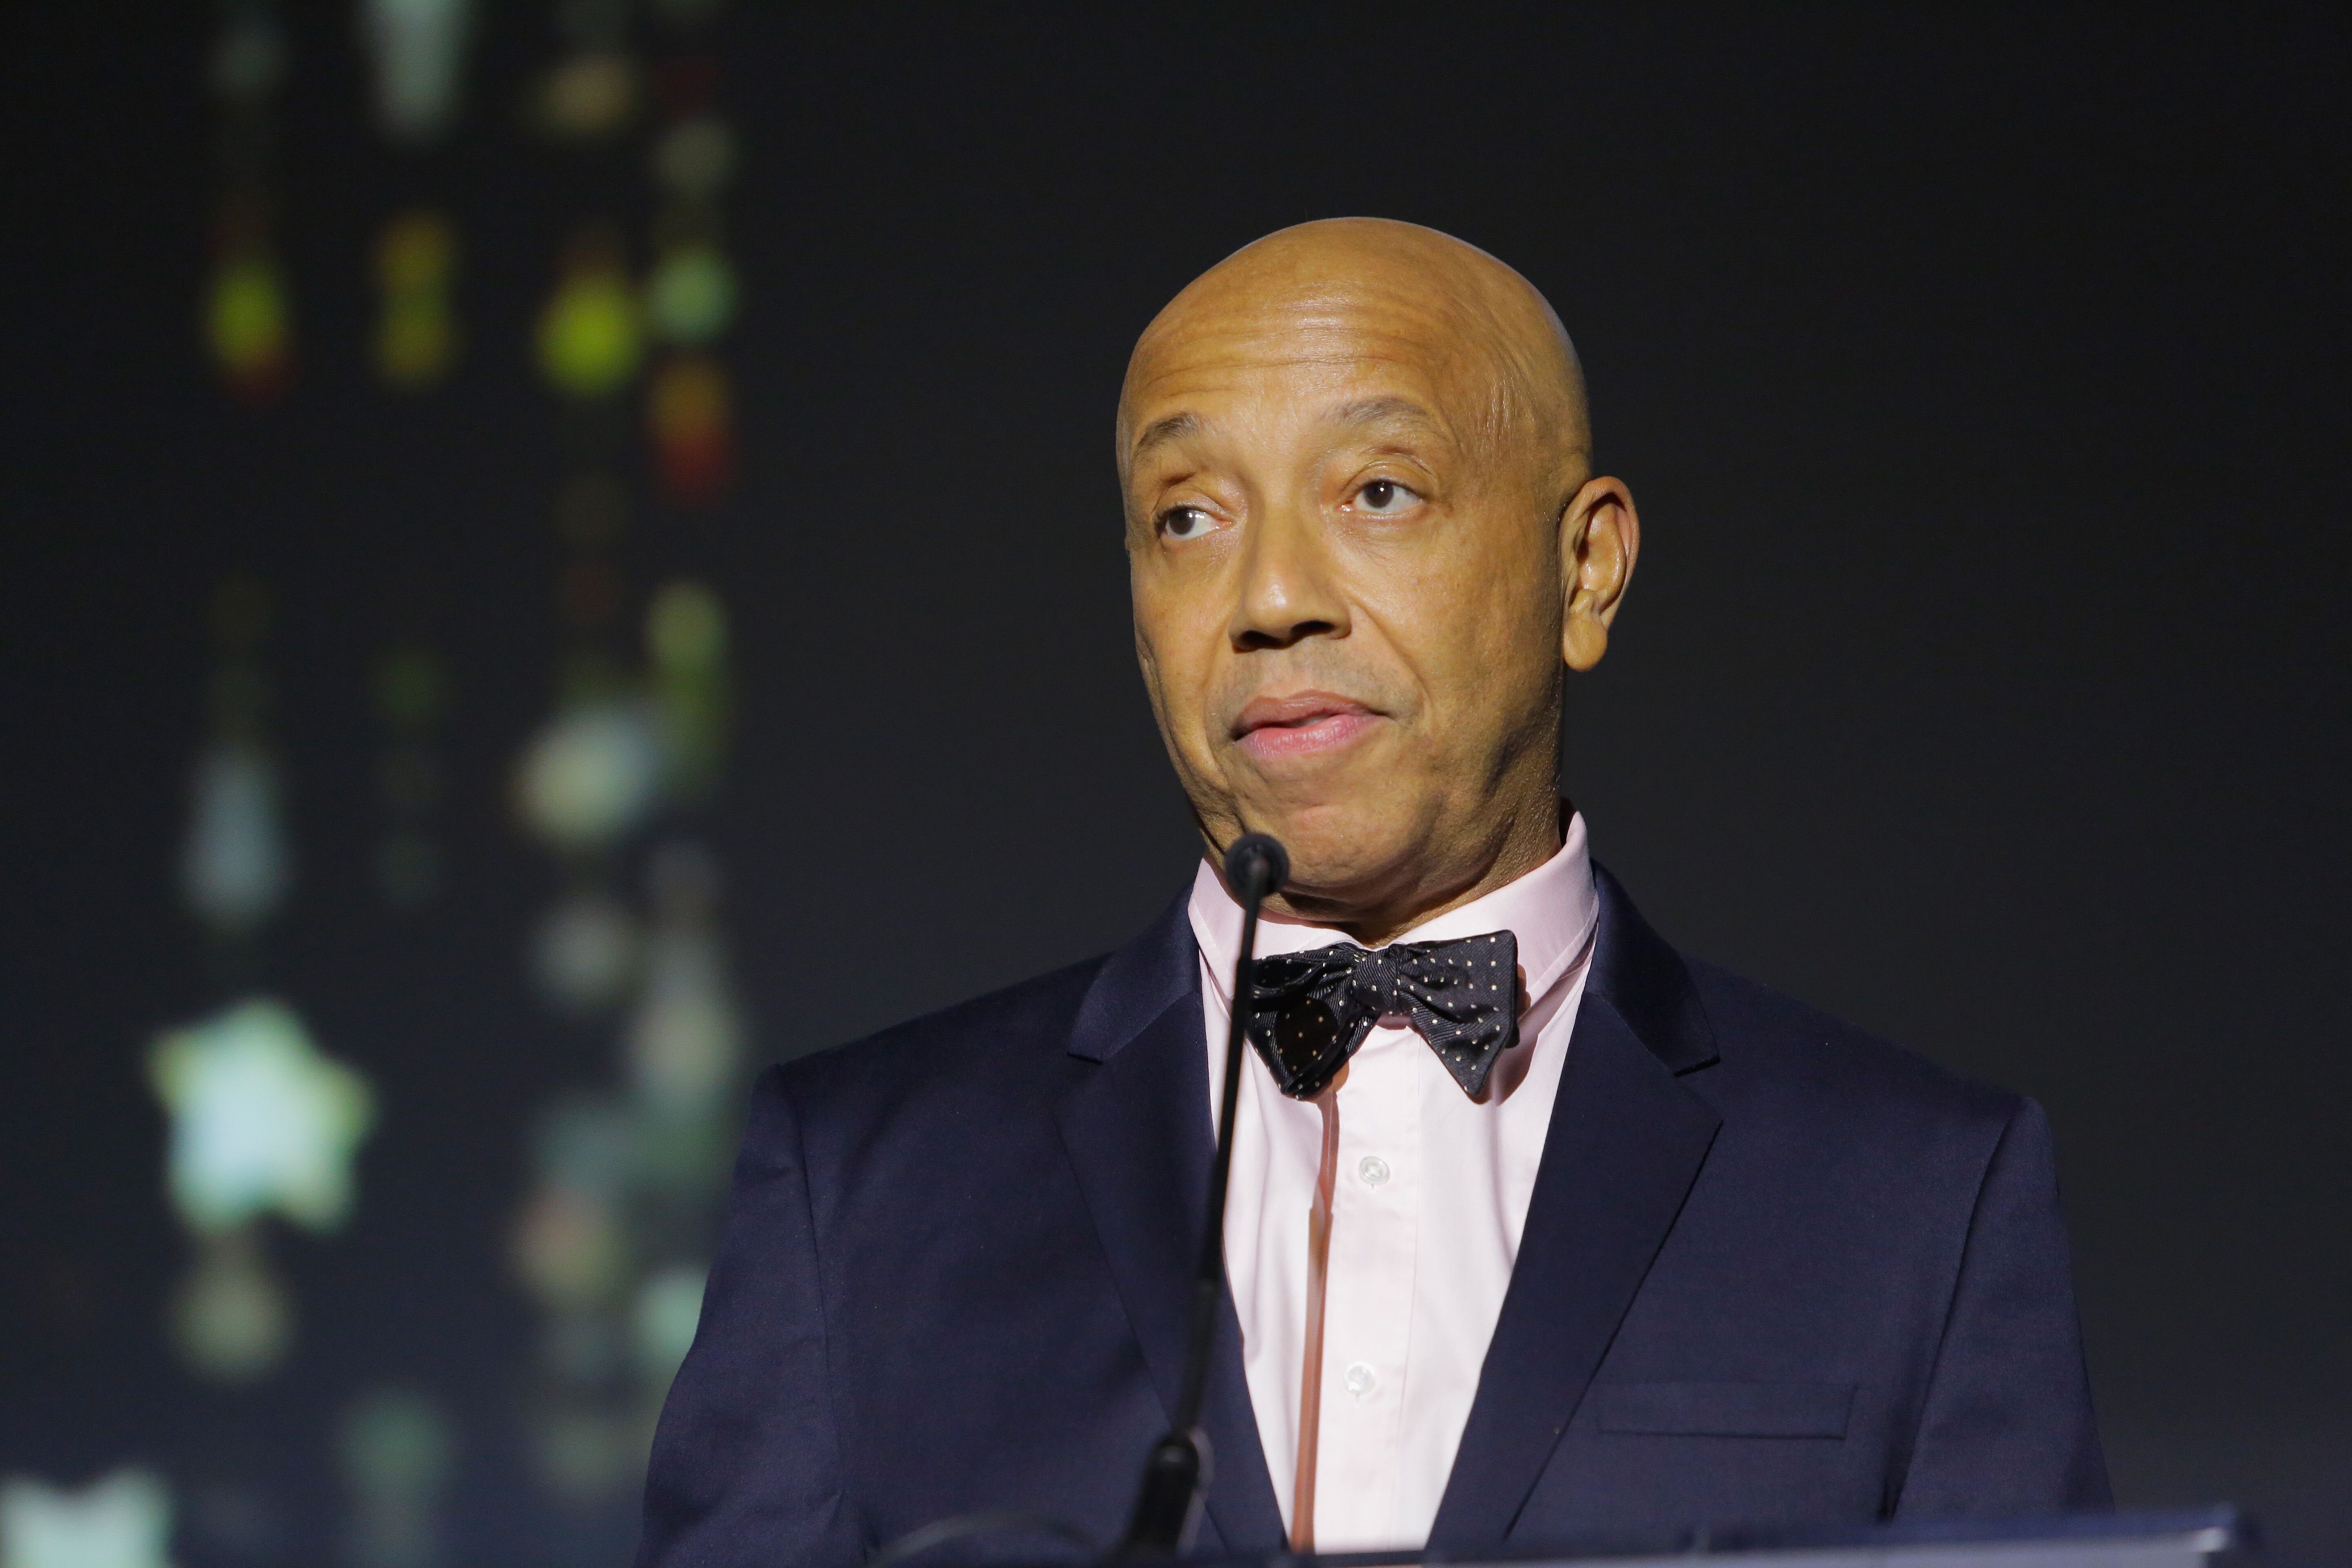 Music producer Russell Simmons speaks onstage at the 2017 Make a Wish Gala on November 9, 2017 | Photo: Getty Images